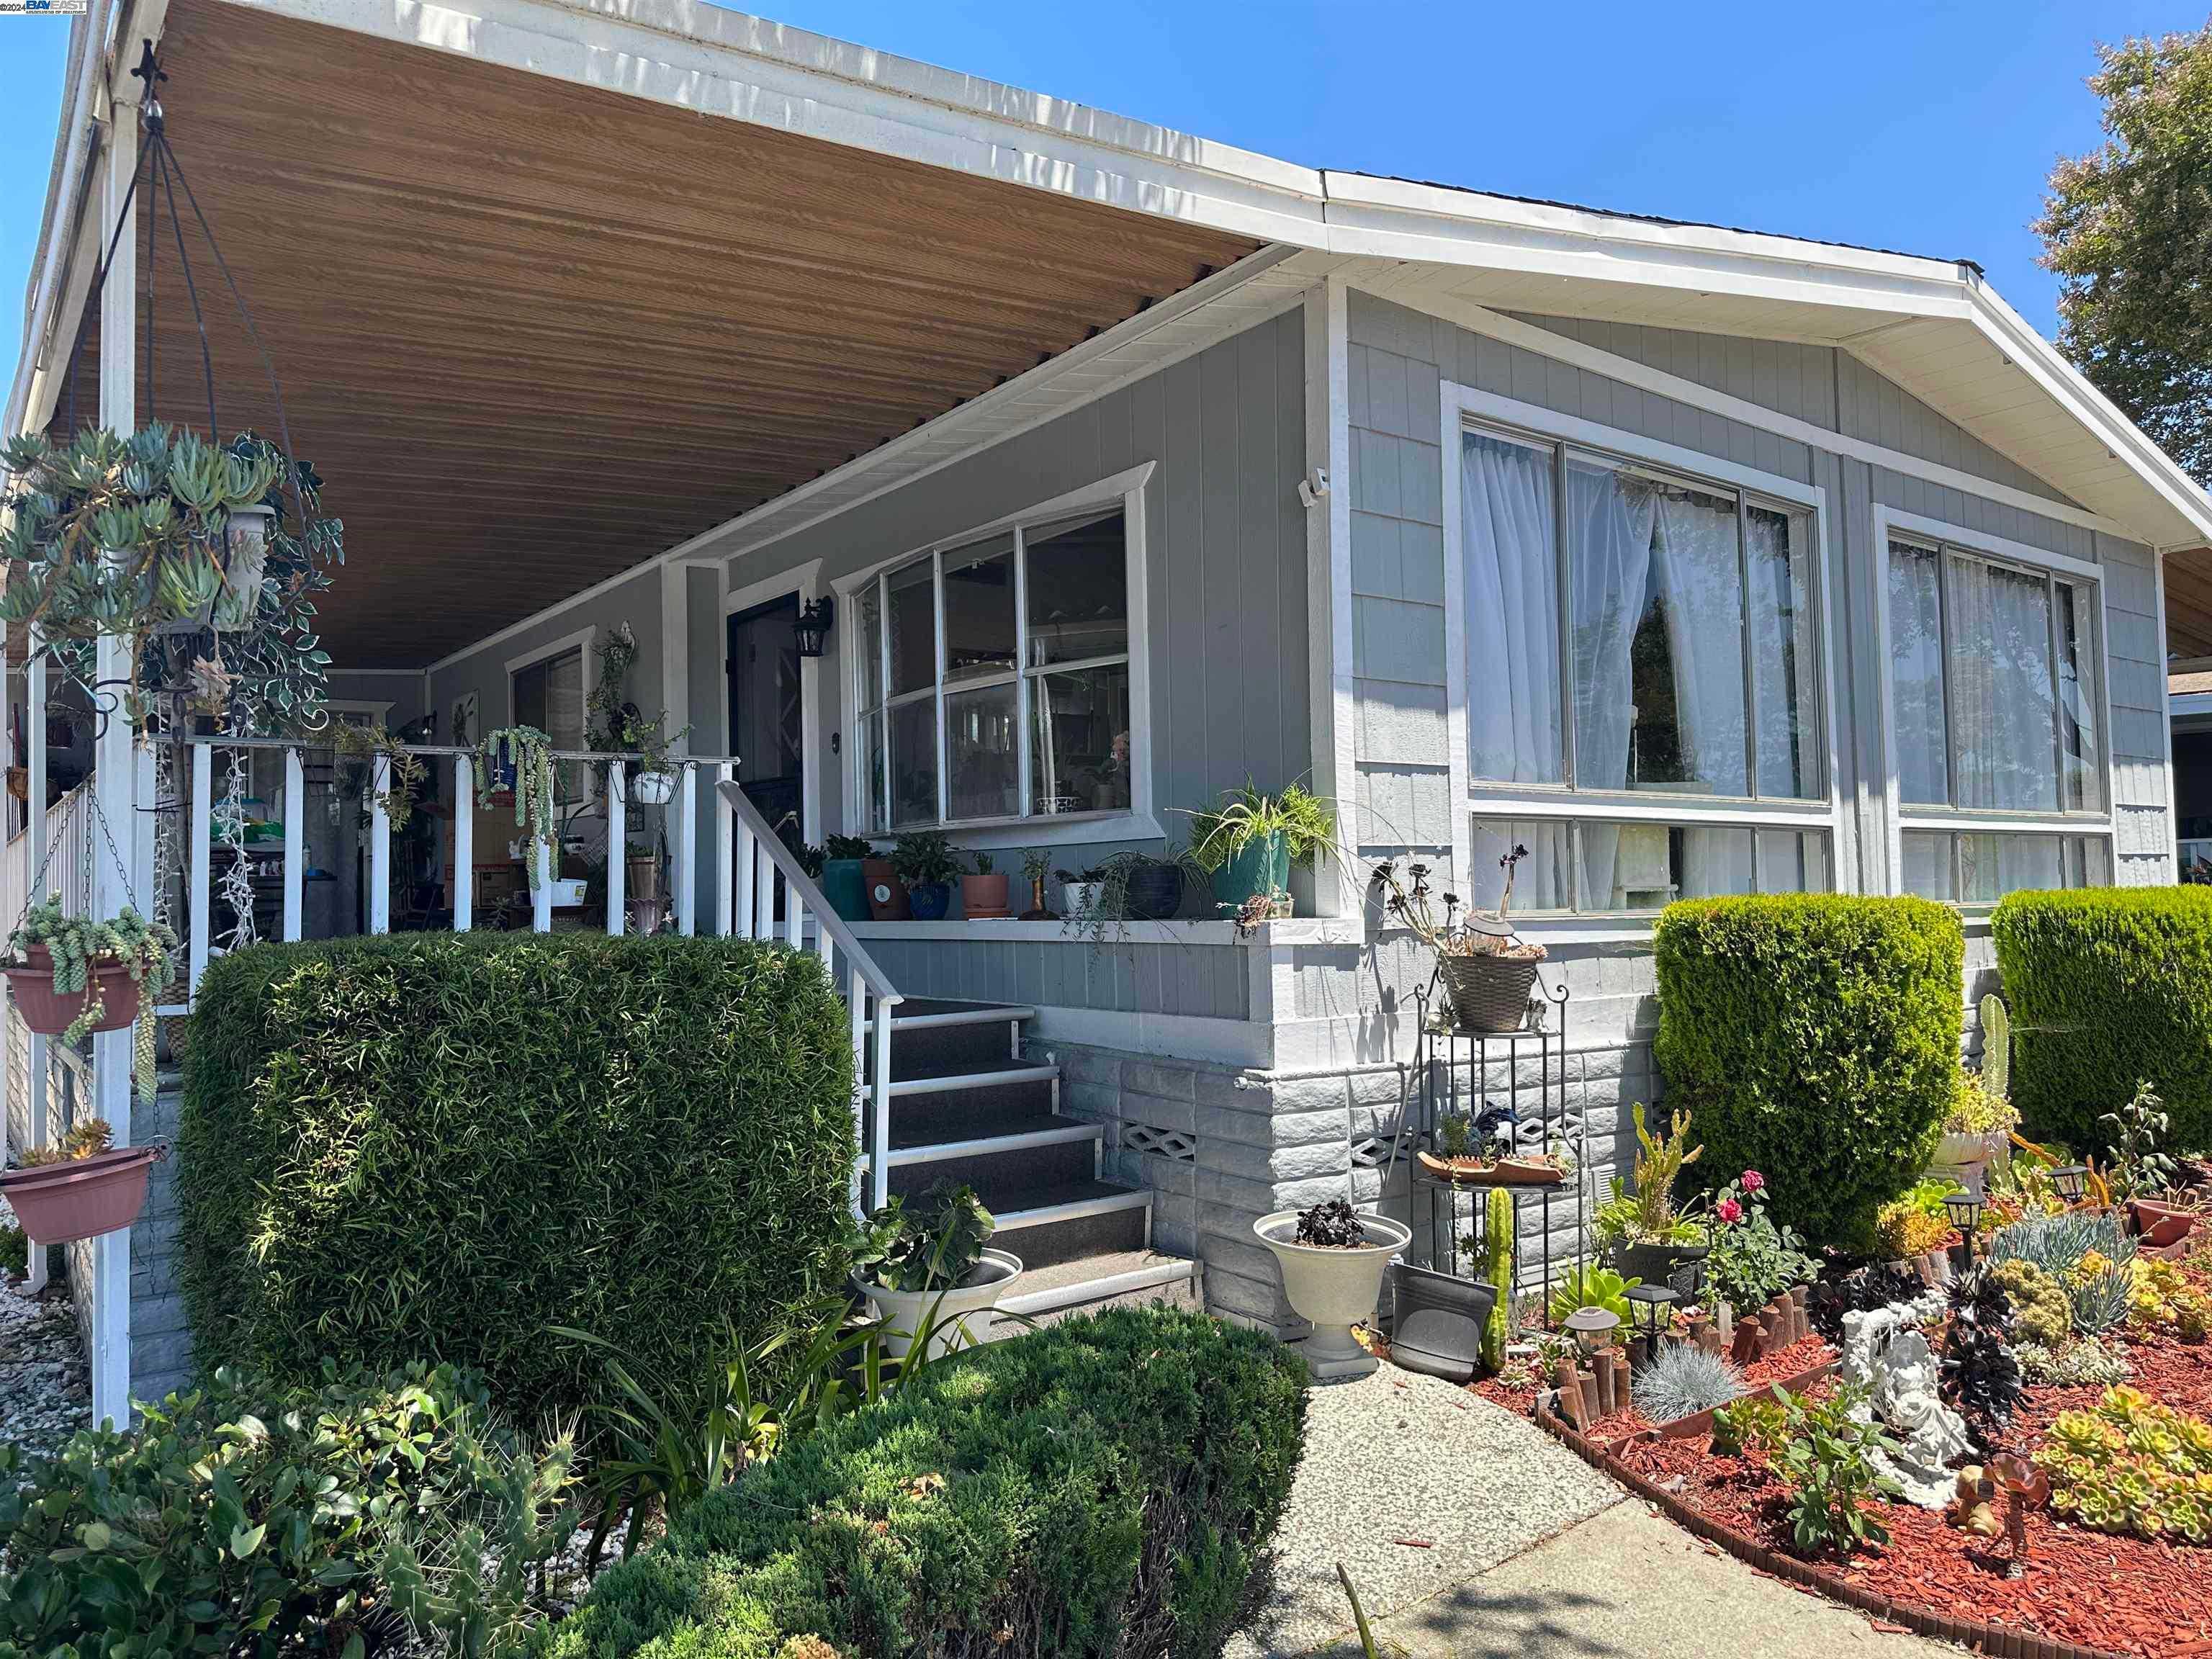 981 Fall River, 41065354, Hayward, Mobile Home,  for sale, Mohan Chalagalla, REALTY EXPERTS®